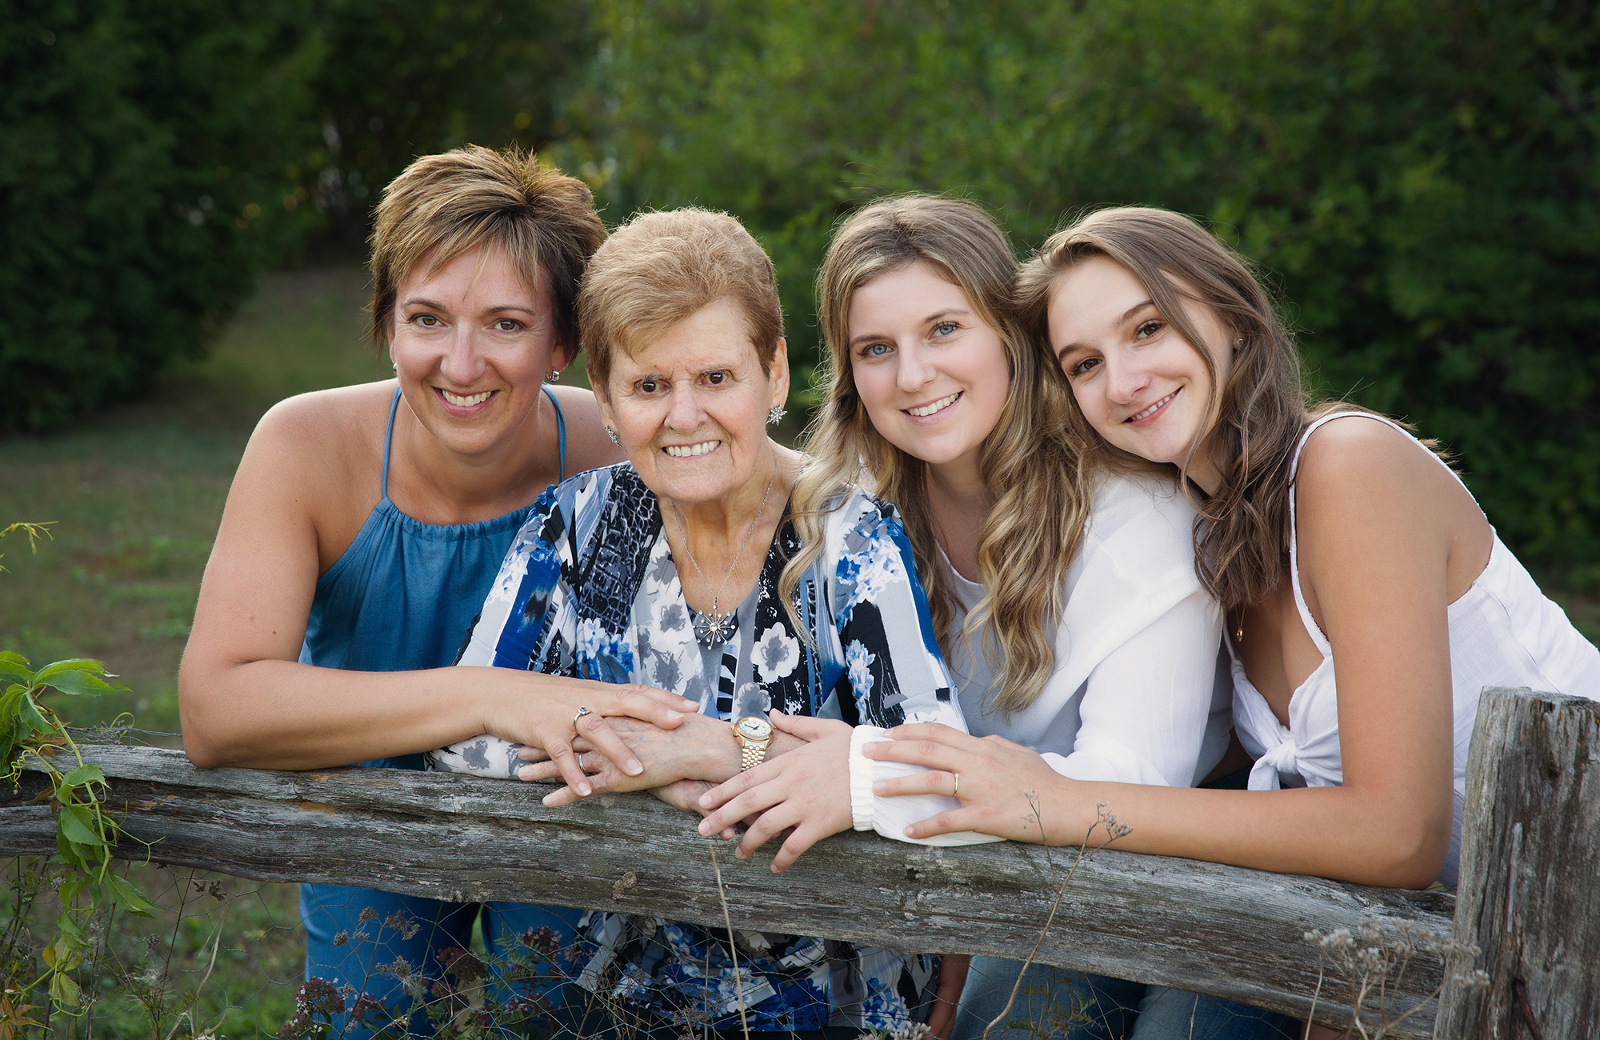 Outdoor portrait session featuring a generational photo with grandmother, mother, and two daughters leaning against a rustic fence in Mallard's Landing park in Sudbury, Ontario. Image by Helga Himer Photography.